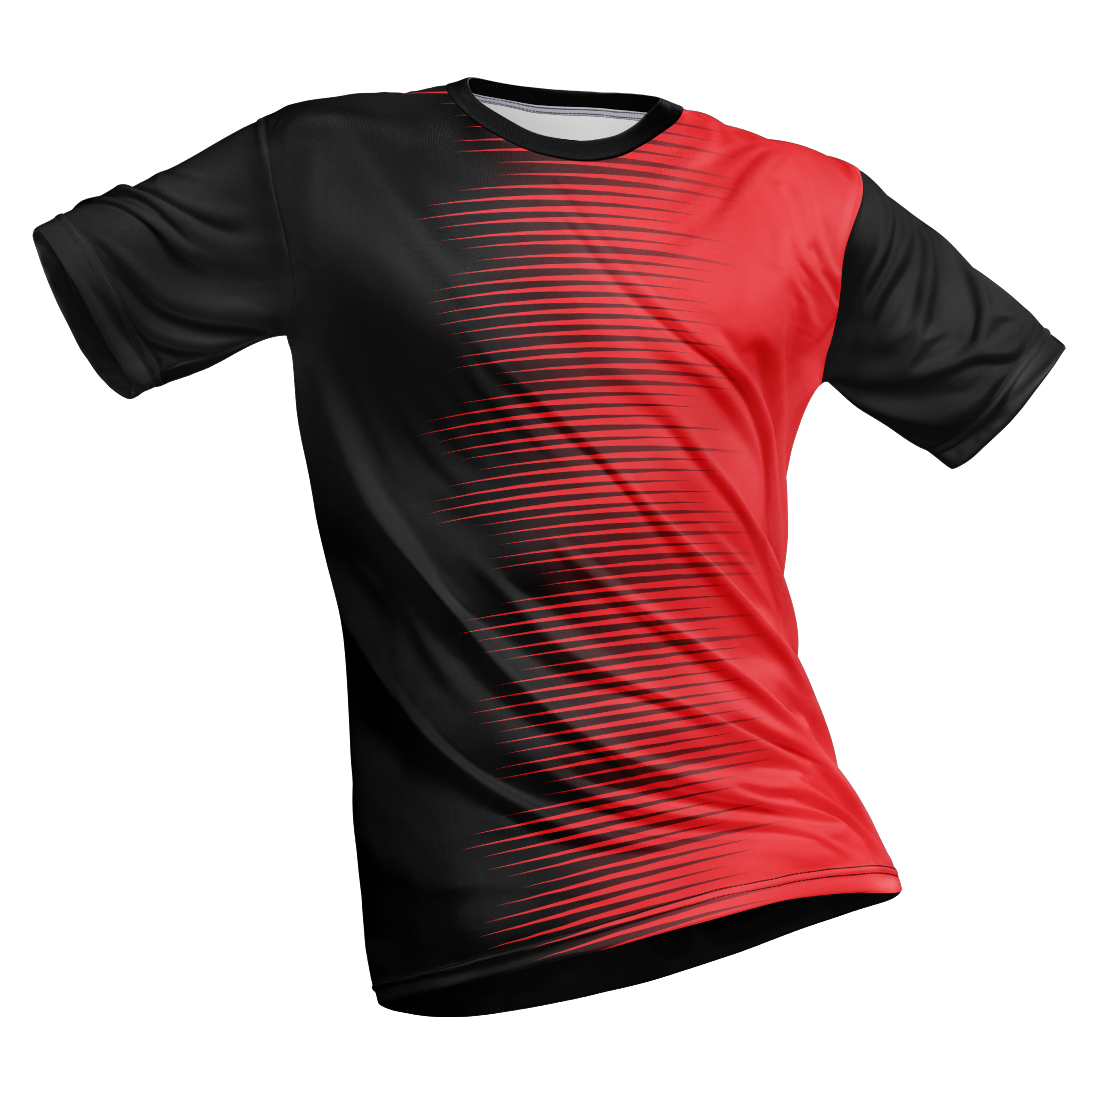 Polyester Half Sleeve Jersey with Round Collar and All Over Digital Print.